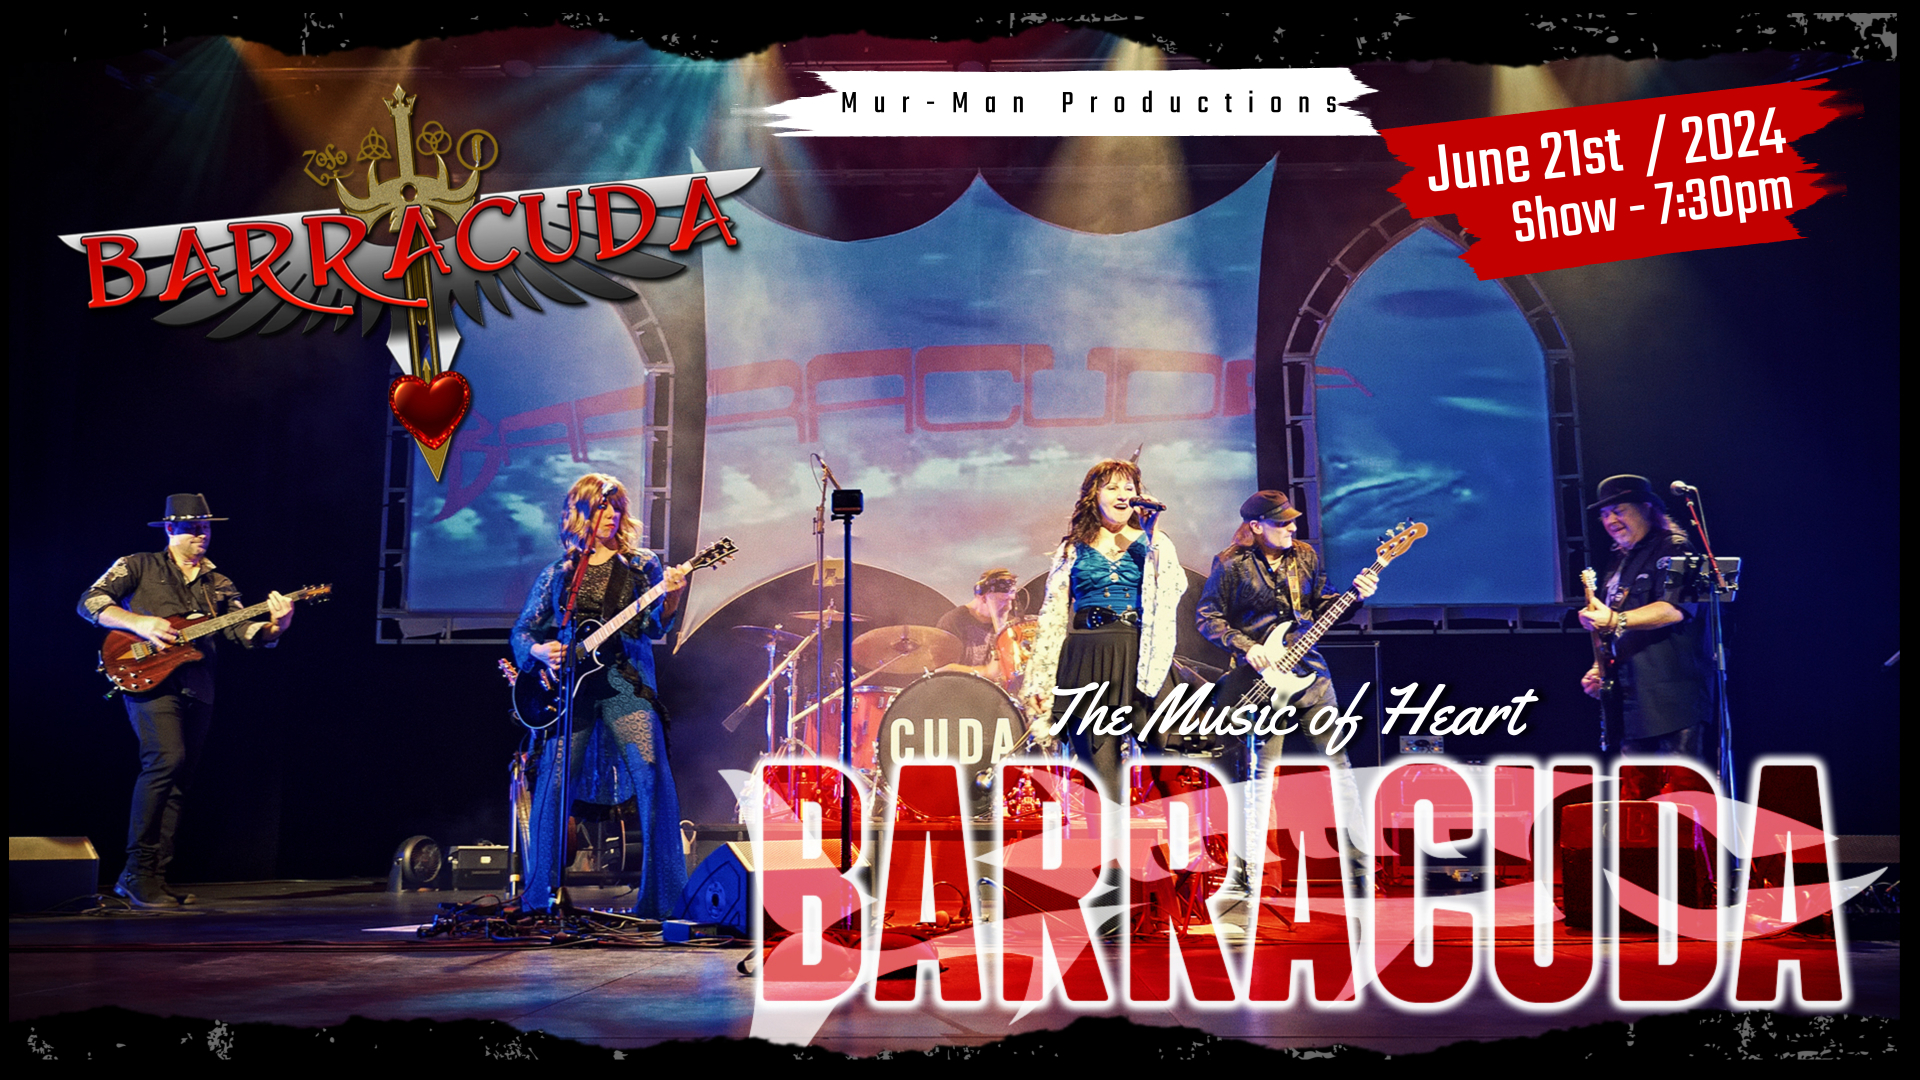 Barracuda - Tribute to the band Heart